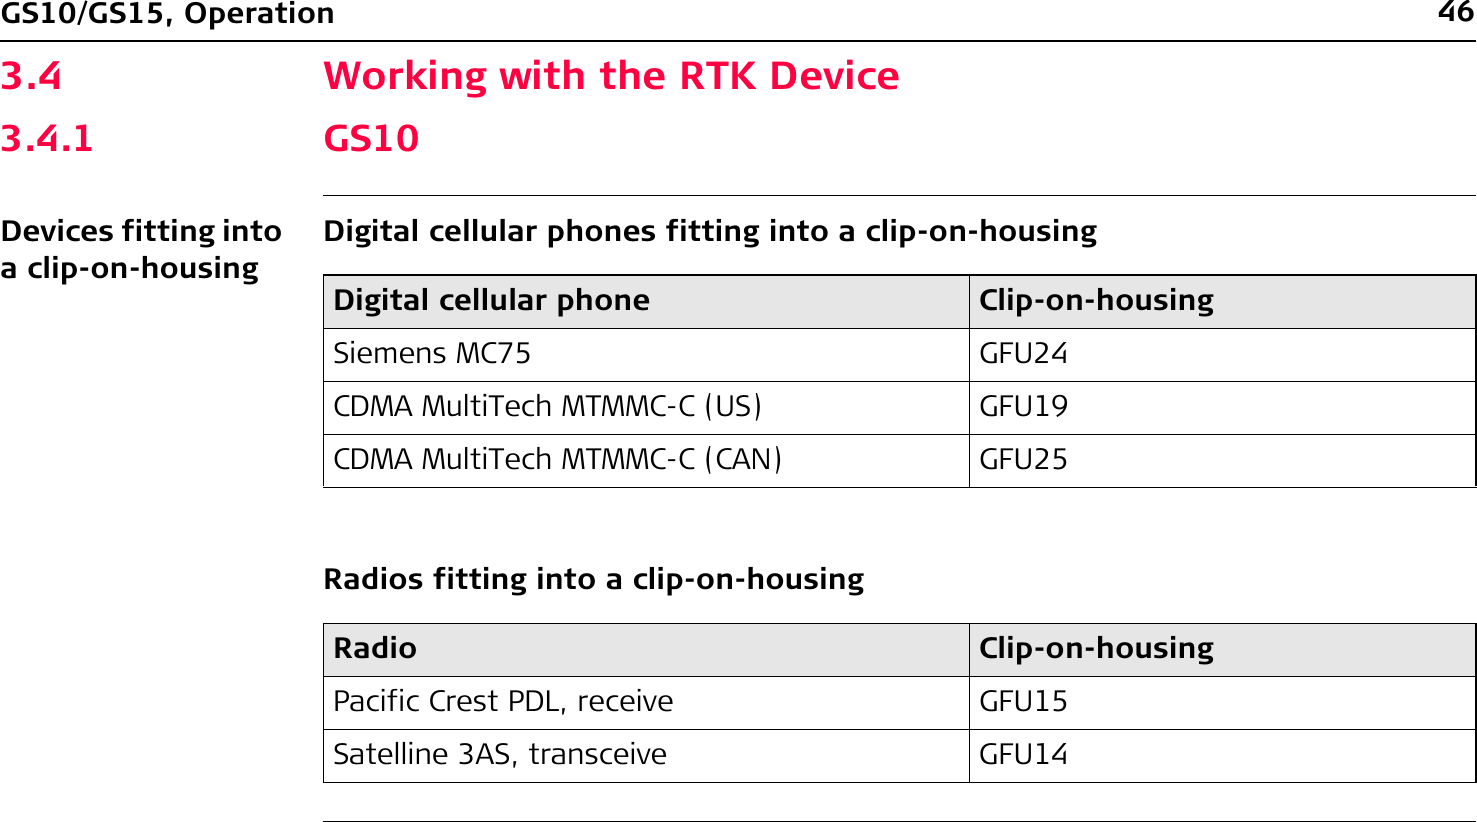 46GS10/GS15, Operation3.4 Working with the RTK Device3.4.1 GS10Devices fitting into a clip-on-housingDigital cellular phones fitting into a clip-on-housingRadios fitting into a clip-on-housingDigital cellular phone Clip-on-housingSiemens MC75 GFU24CDMA MultiTech MTMMC-C (US) GFU19CDMA MultiTech MTMMC-C (CAN) GFU25Radio Clip-on-housingPacific Crest PDL, receive GFU15Satelline 3AS, transceive GFU14